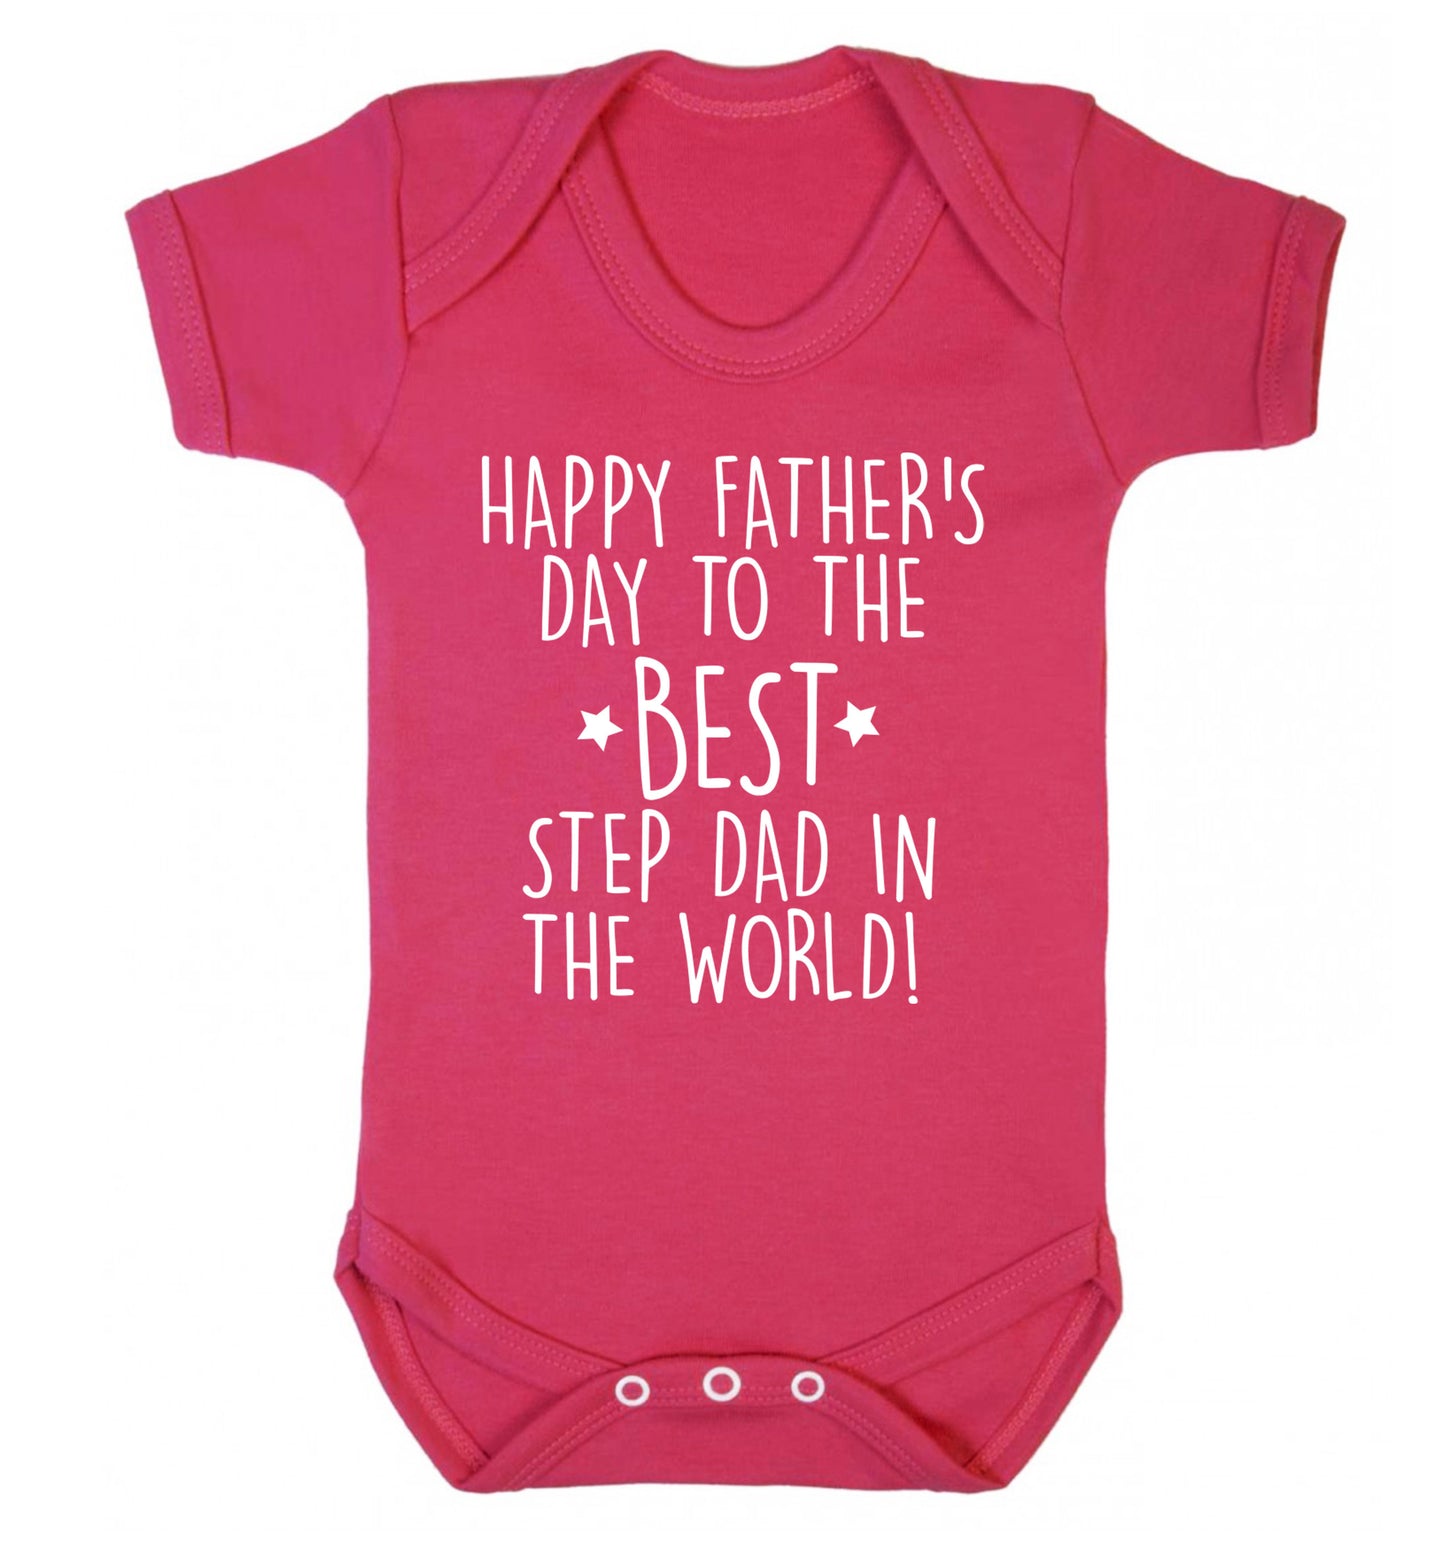 Happy Father's day to the best step dad in the world! Baby Vest dark pink 18-24 months